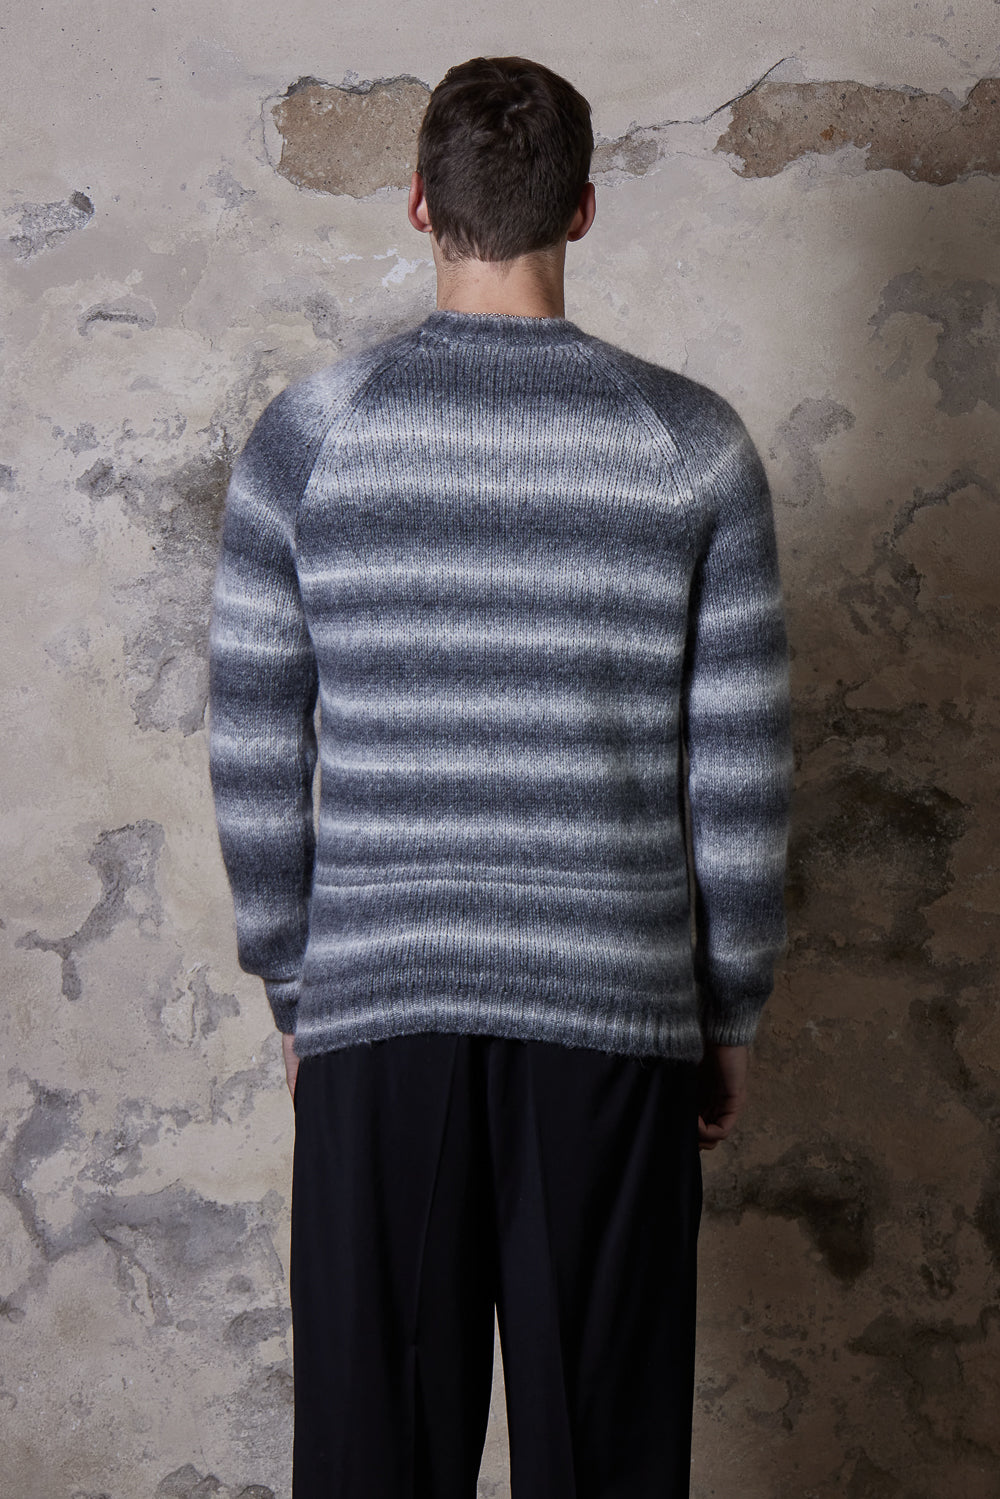 Buy the Daniele Fiesoli Alpaca Stripe Fade Sweatshirt in Grey/White at Intro. Spend £50 for free UK delivery. Official stockists. We ship worldwide.